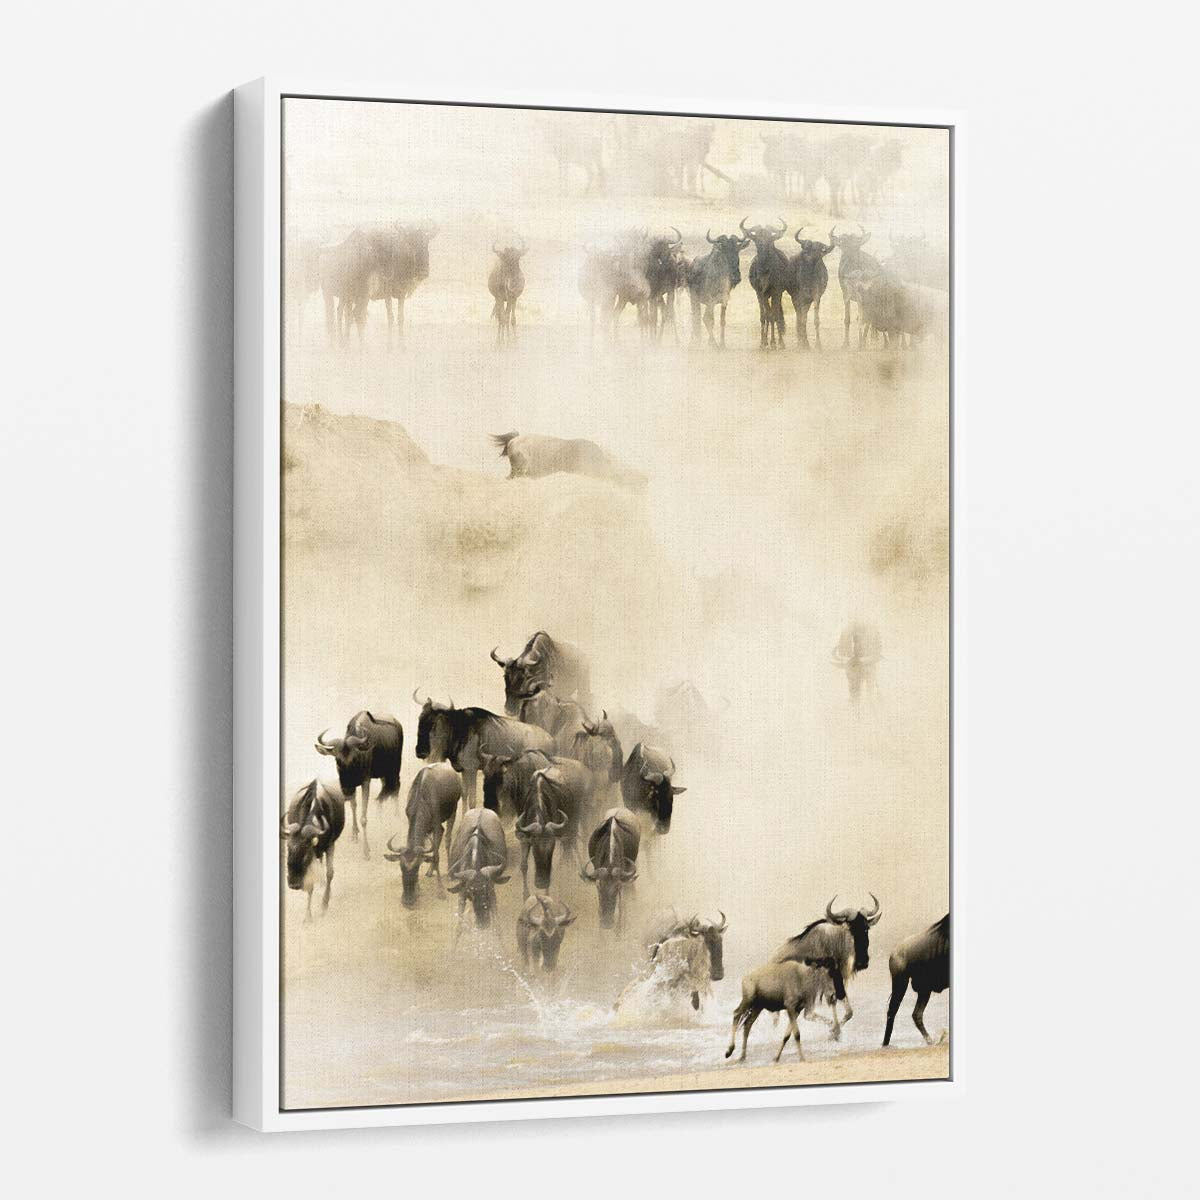 Serengeti Wildebeest Migration Photography, Sepia-toned African Wildlife Art by Luxuriance Designs, made in USA